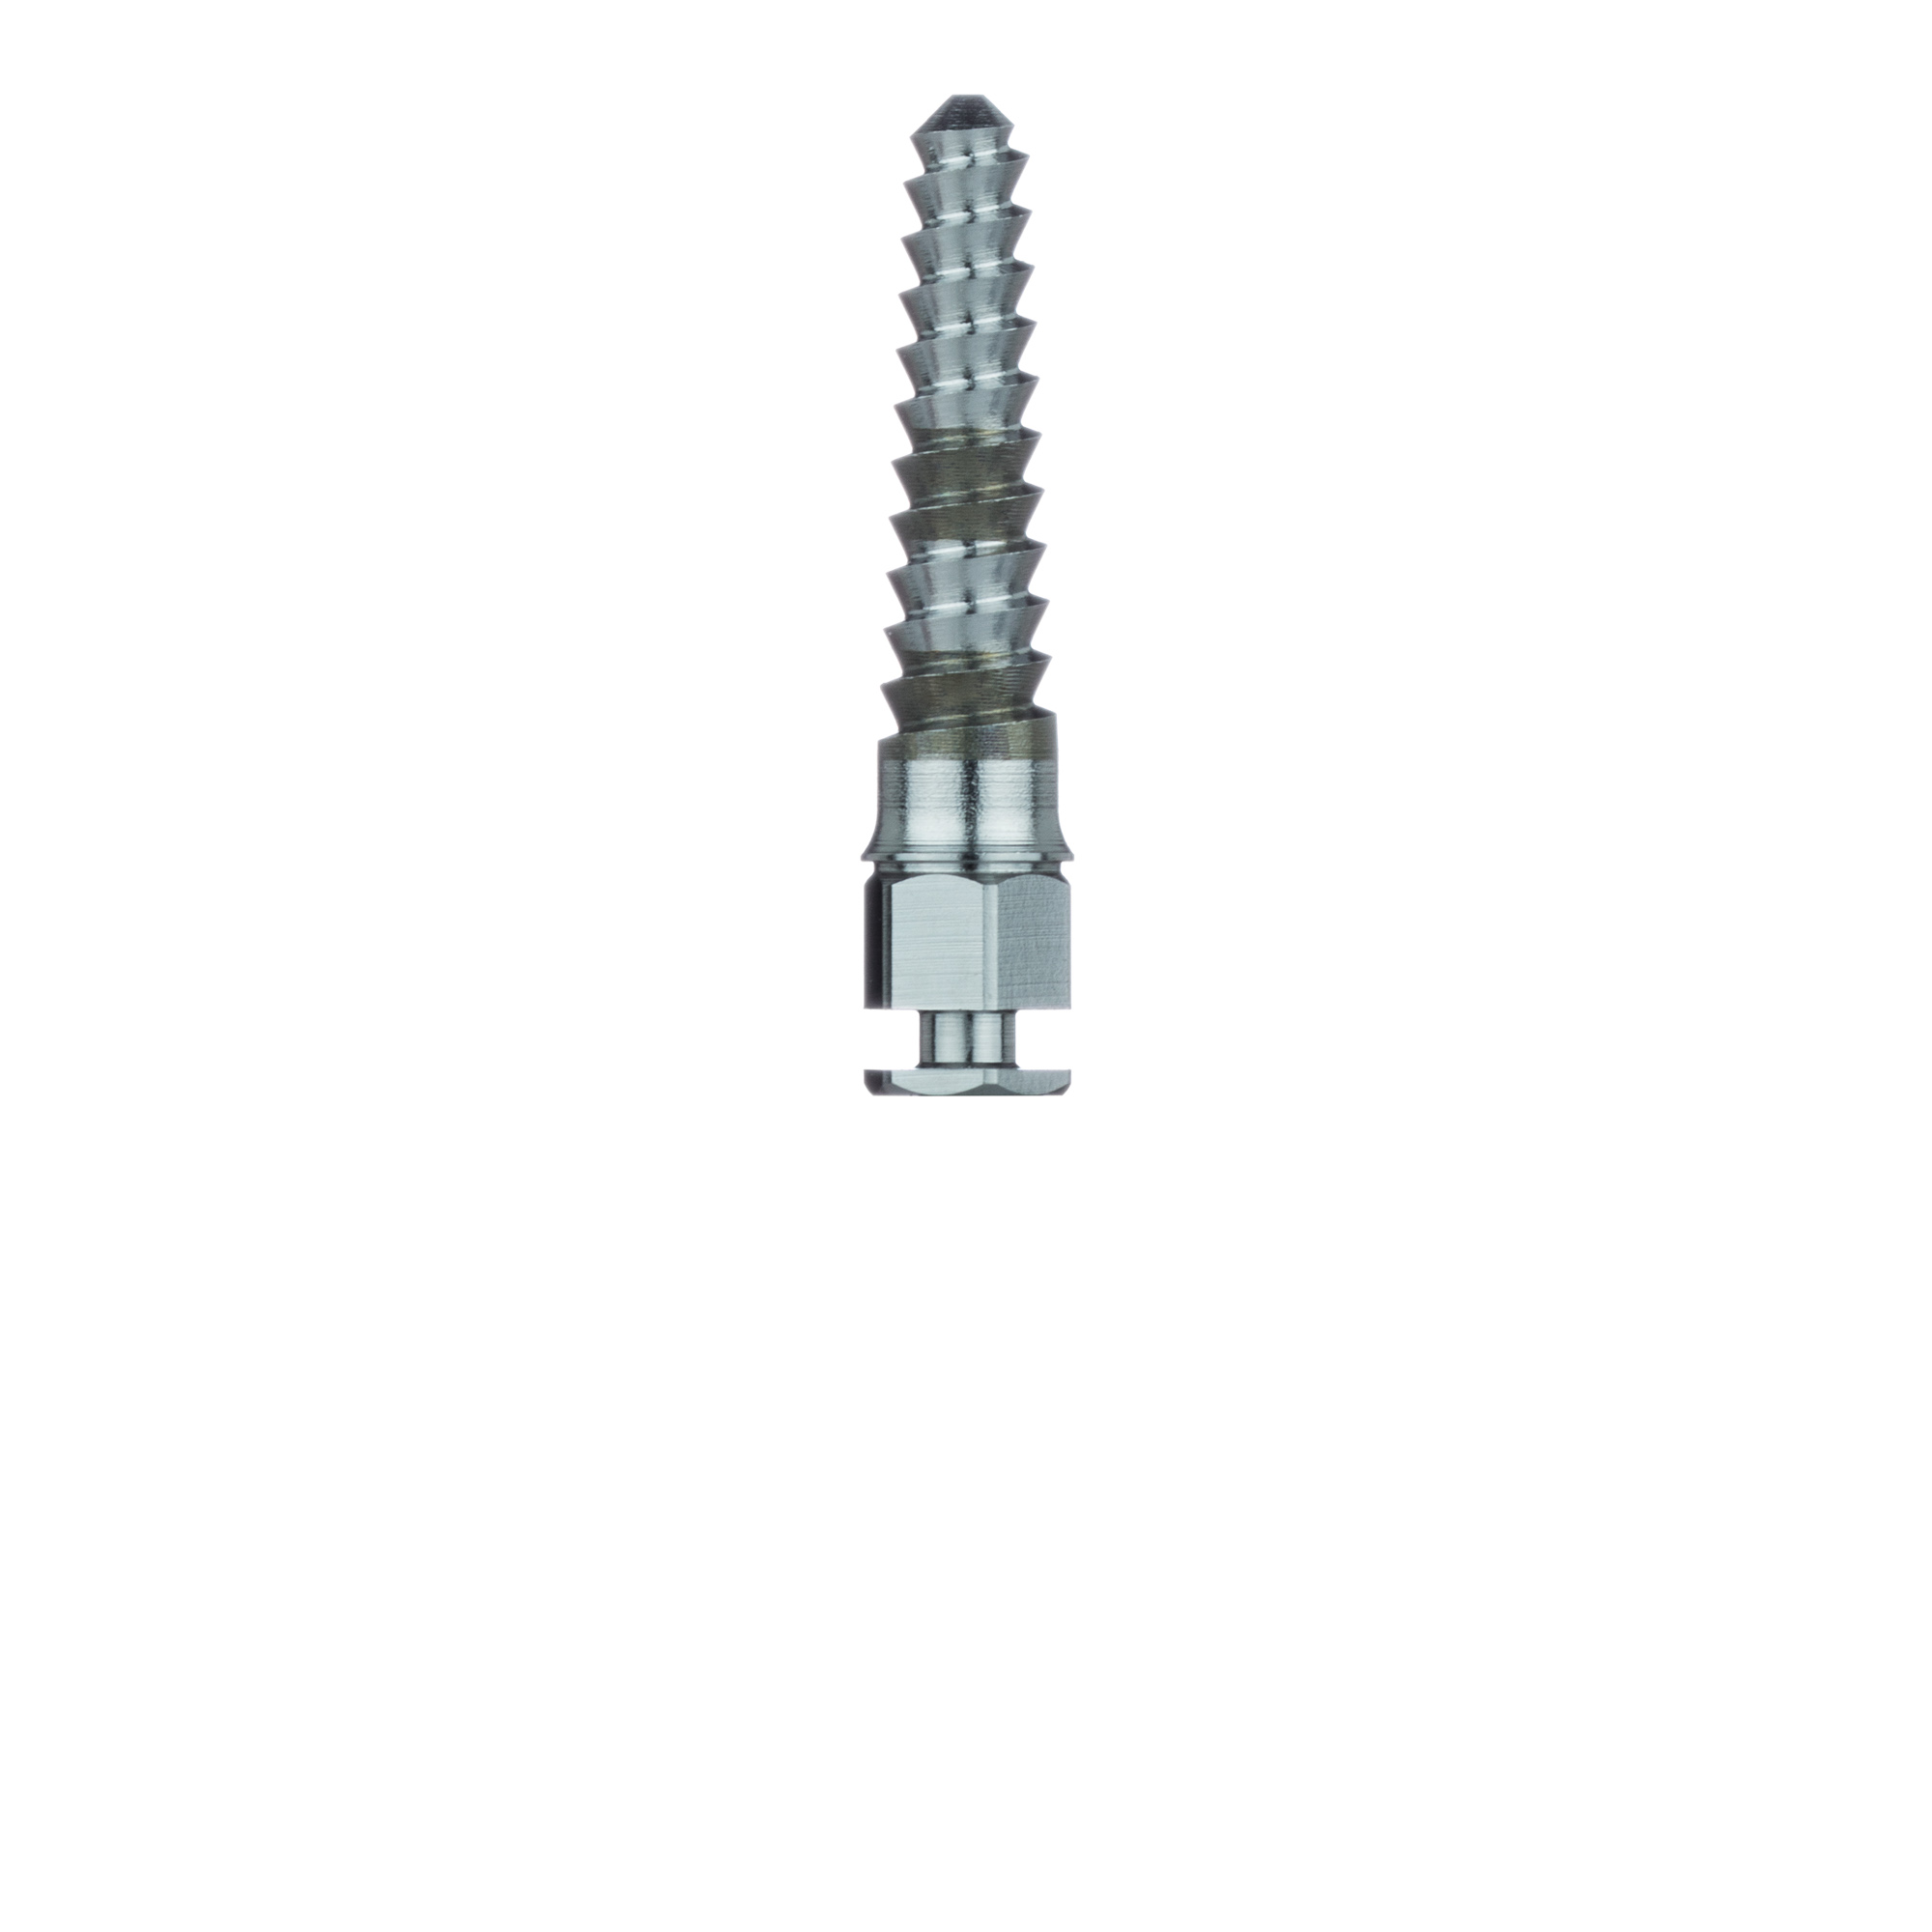 D2005 Surgery, Expansion Spreader, 3.3mm X 12mm